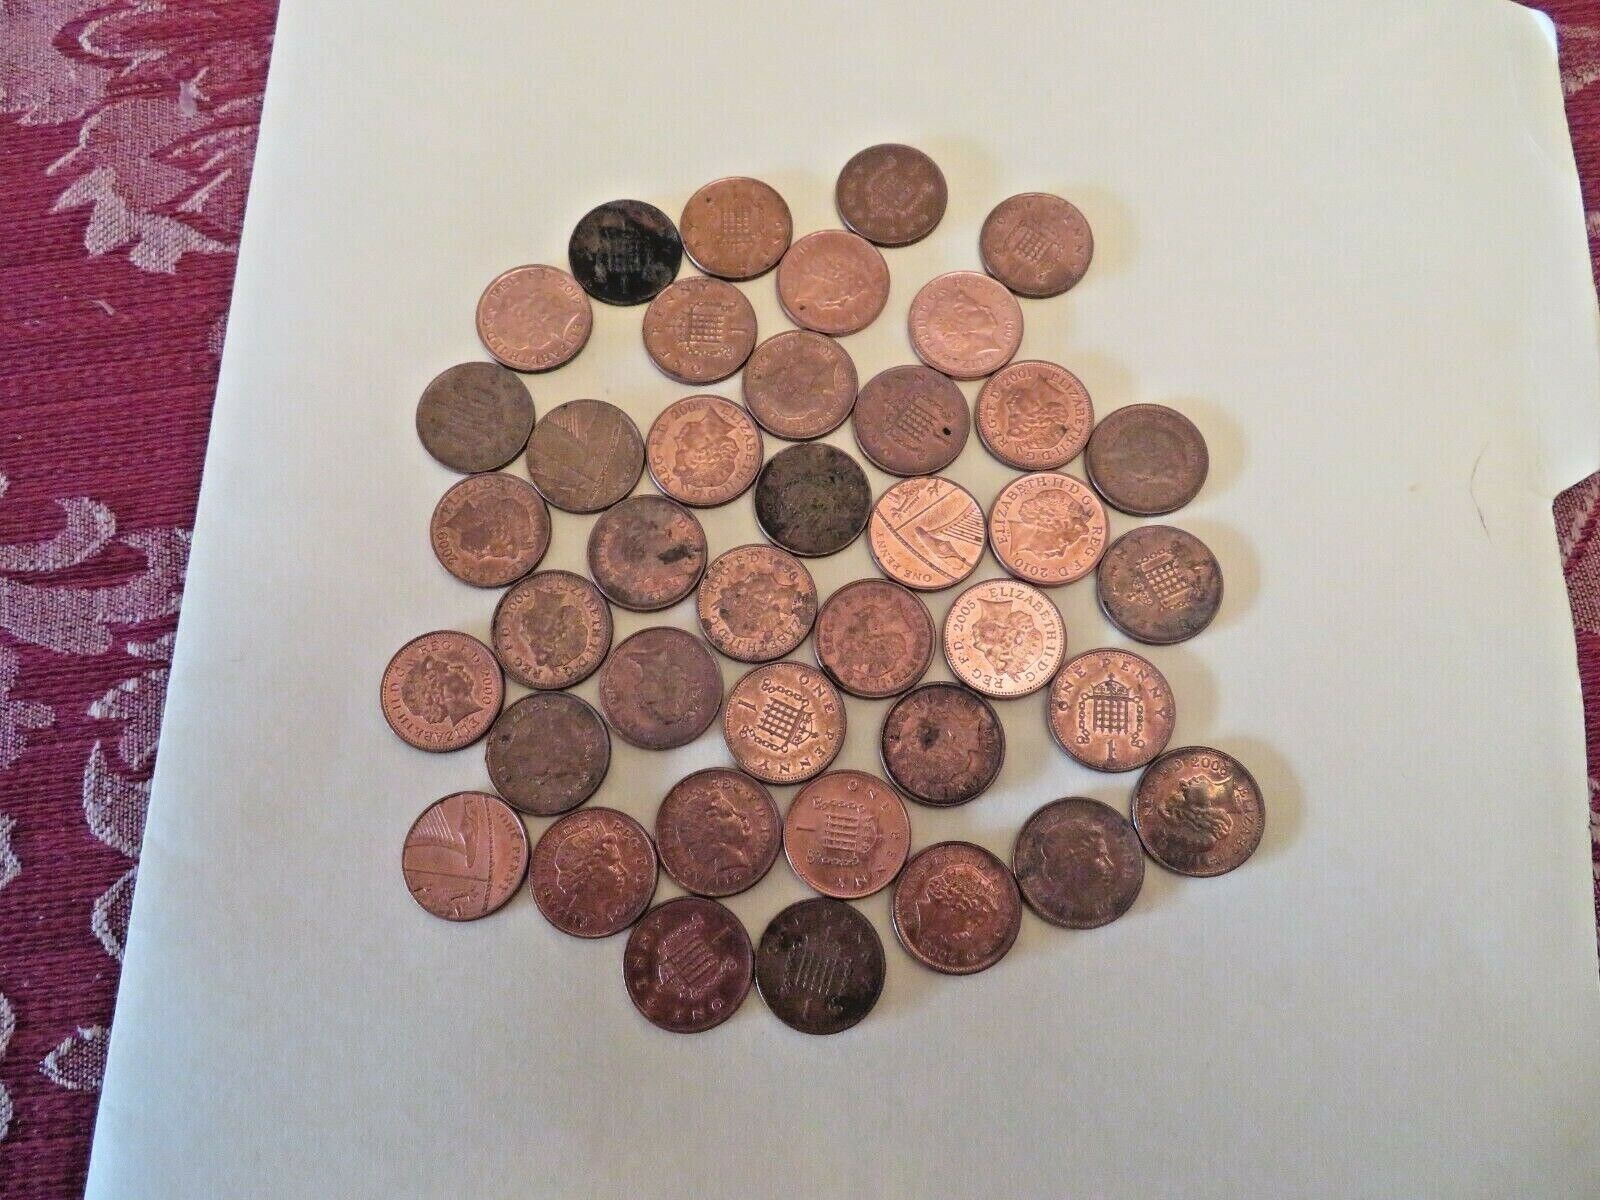  Lot of 40 British 1 Penny Coins.  Без бренда